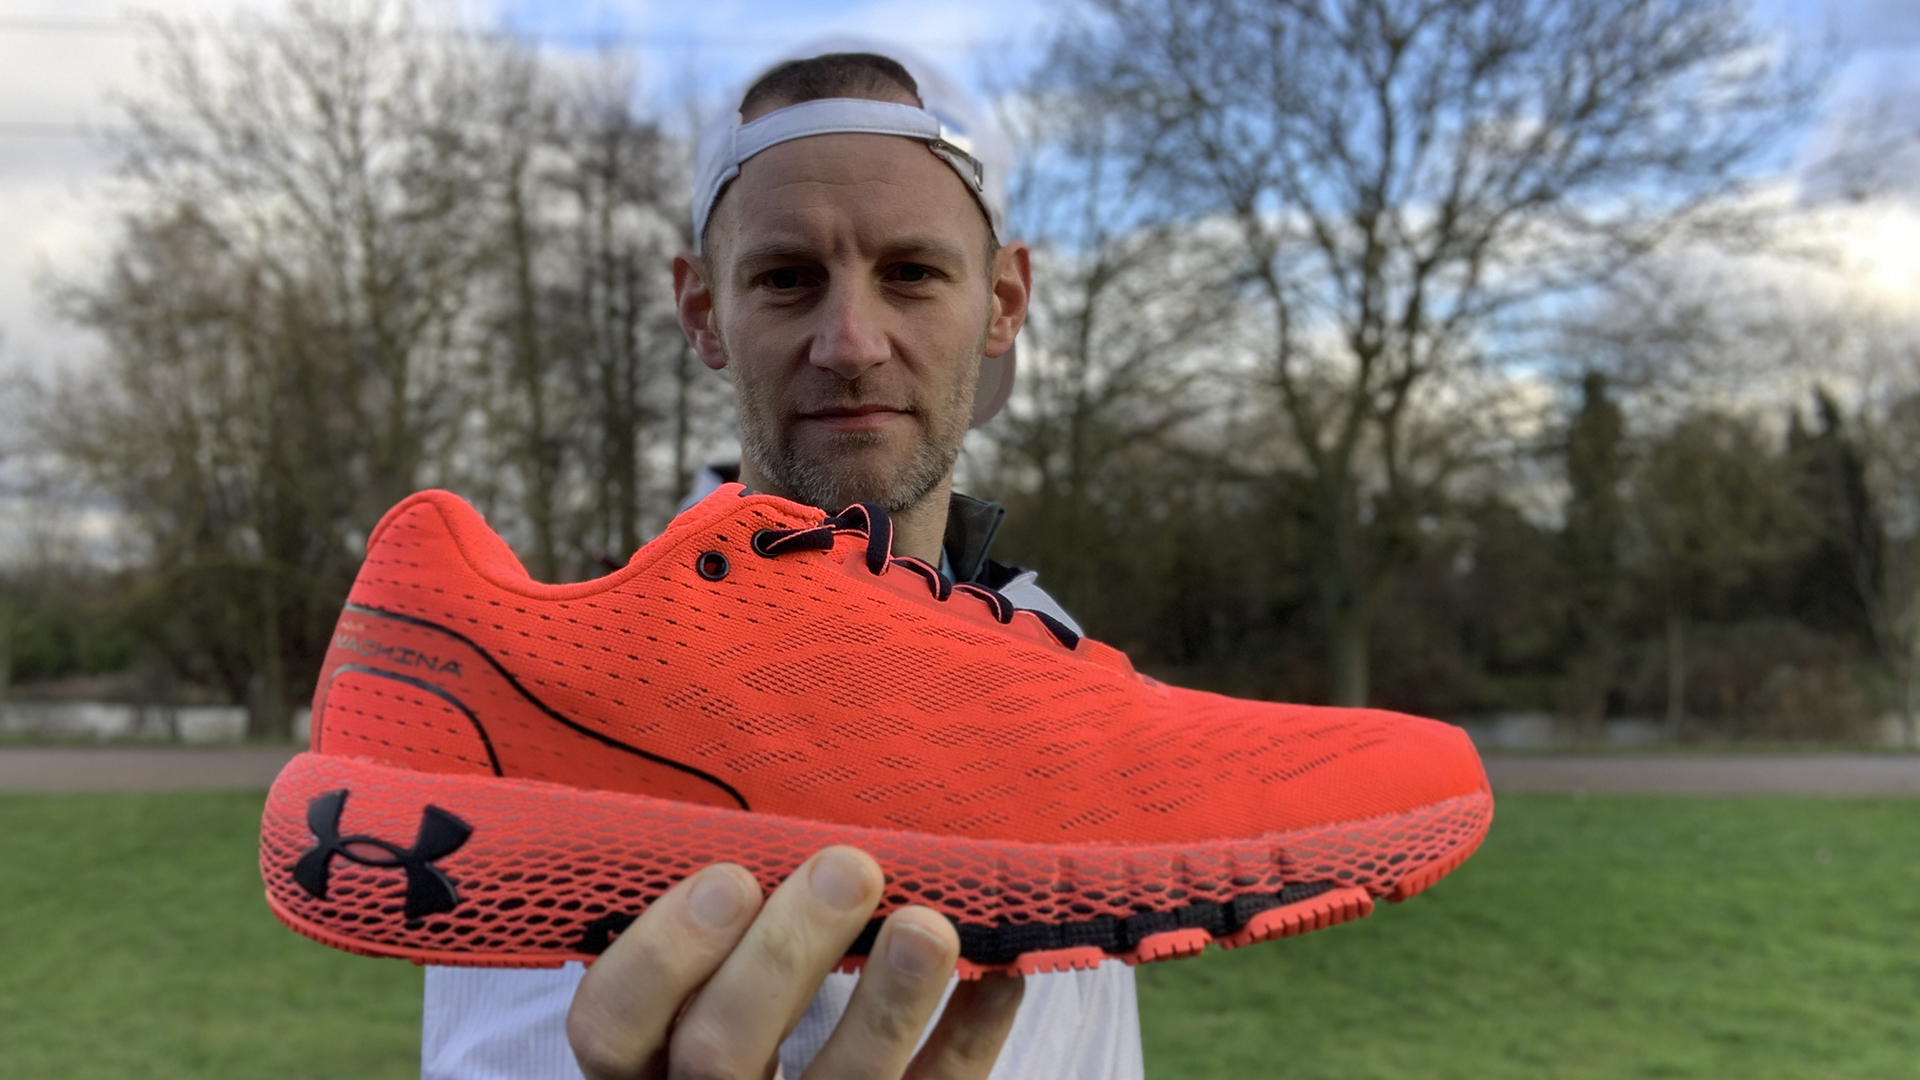 Under Armour HOVR Machina review: The latest ultra cushioned smart